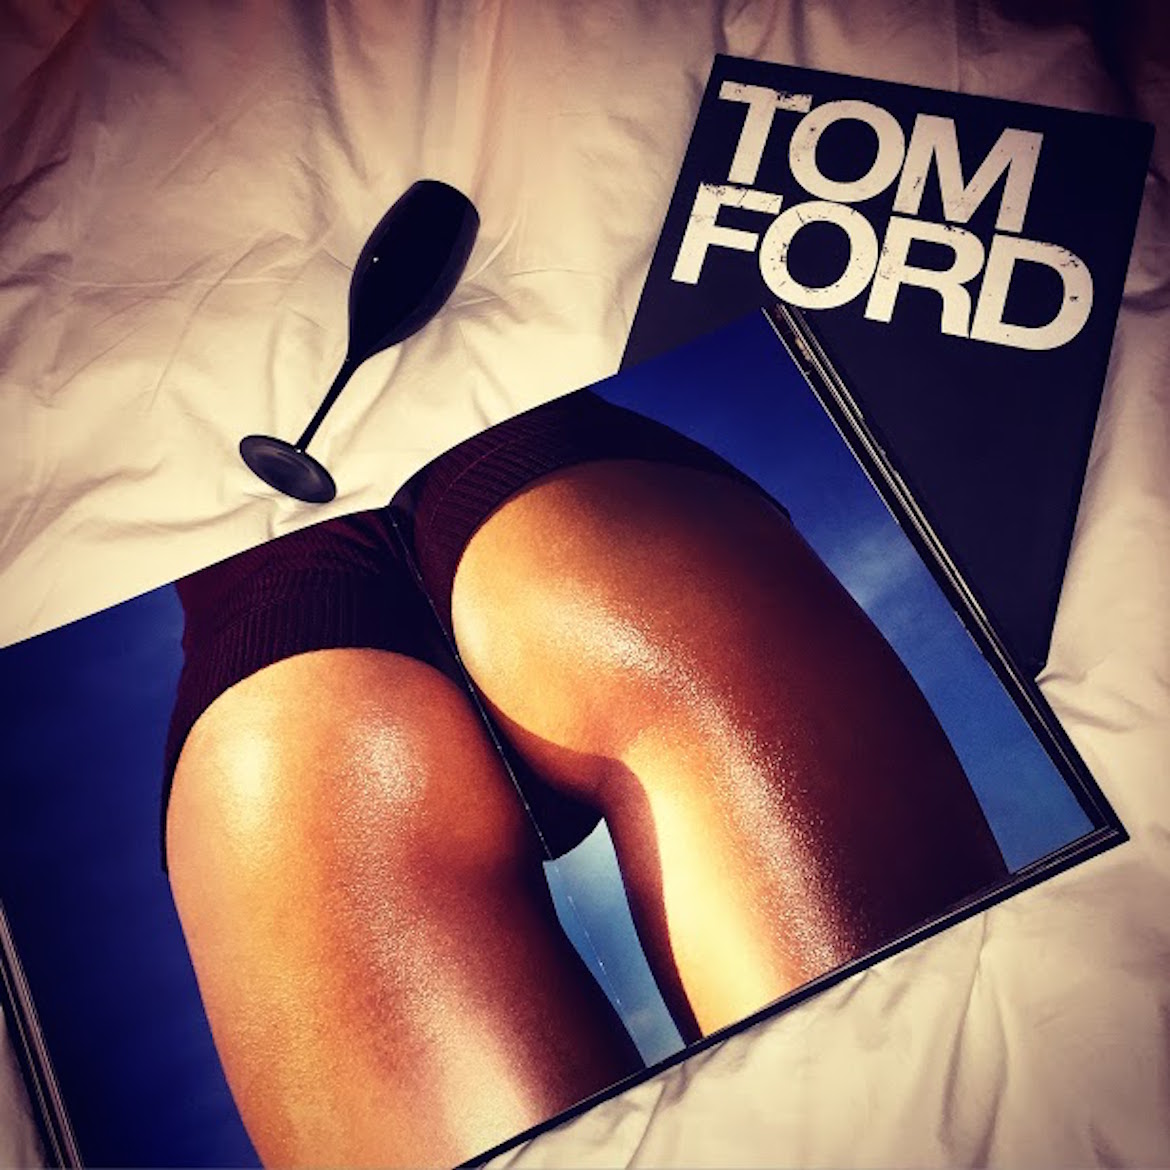 Studying Tom Ford history in bed with a glass of champagne...